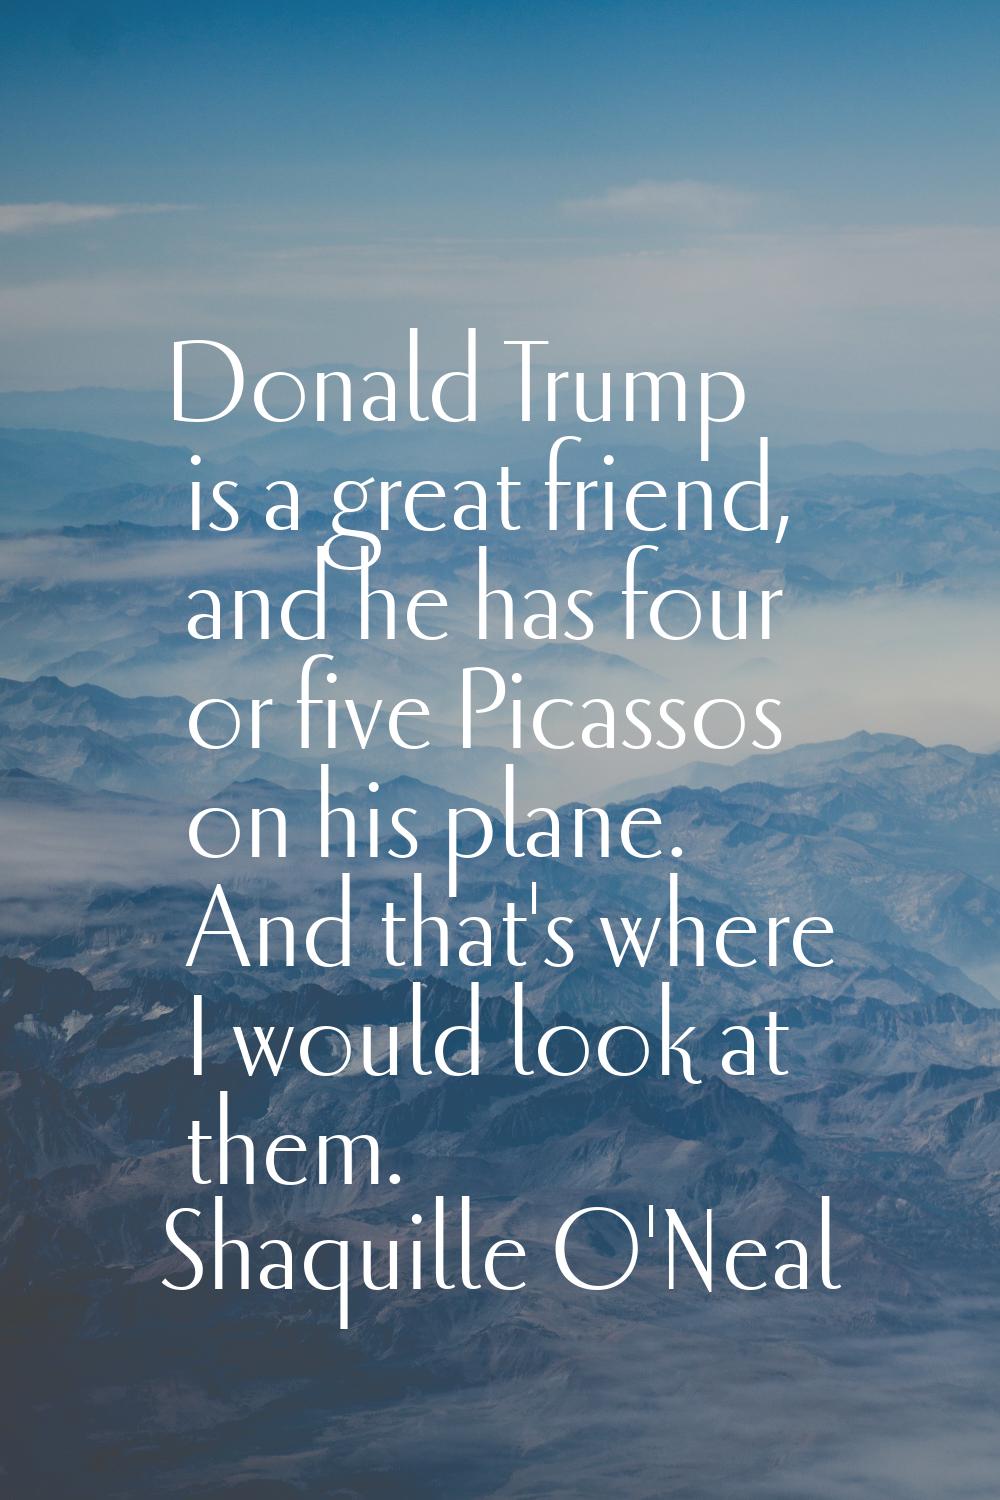 Donald Trump is a great friend, and he has four or five Picassos on his plane. And that's where I w